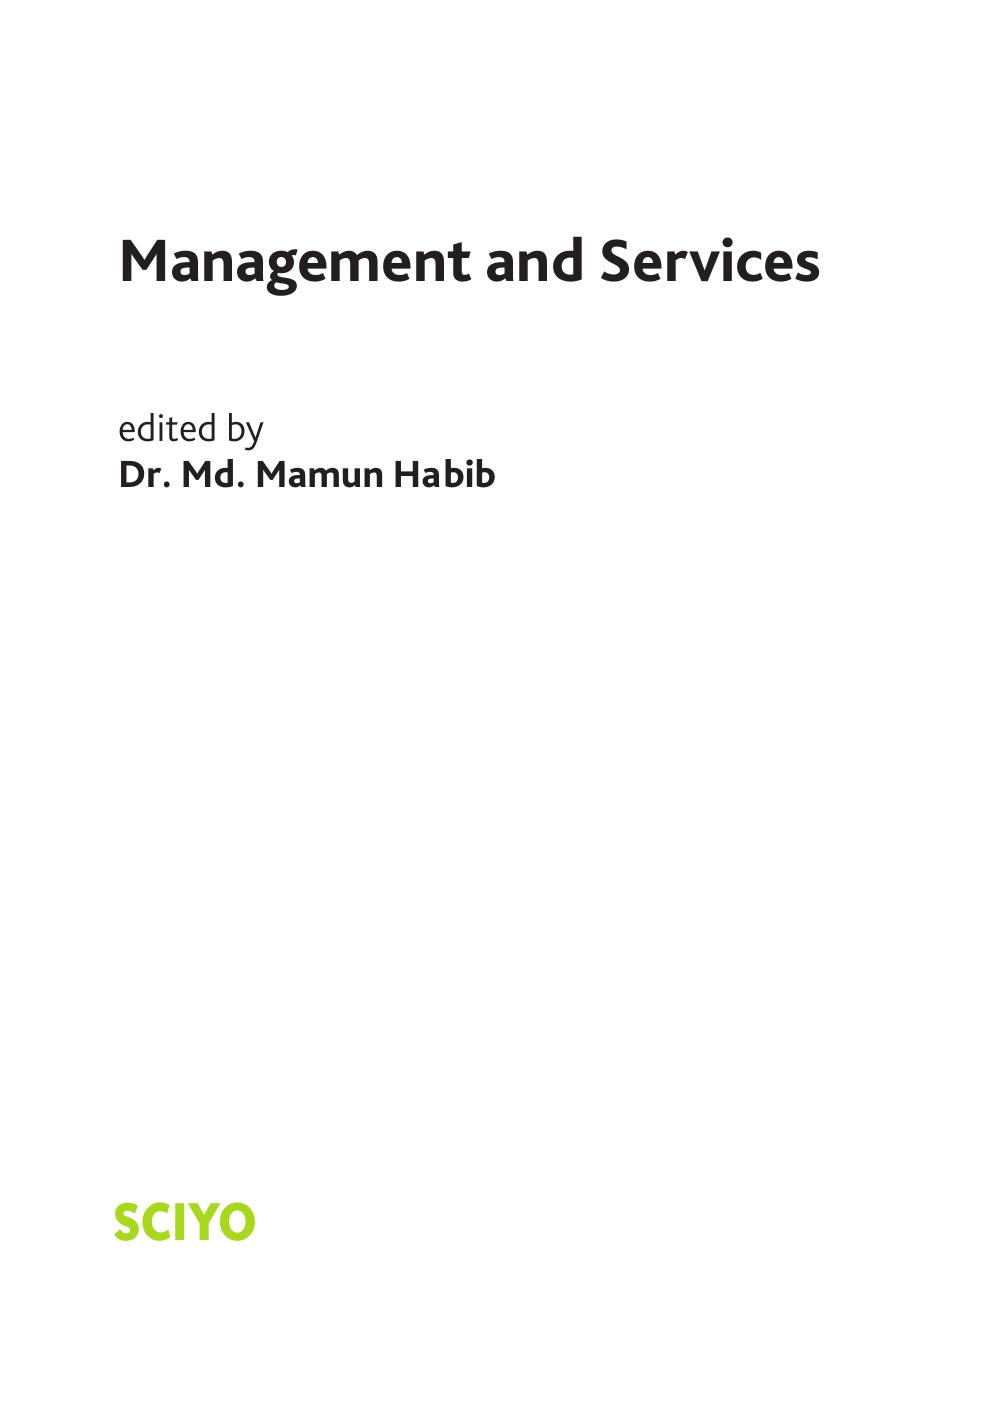 Management and Services 2010.pdf